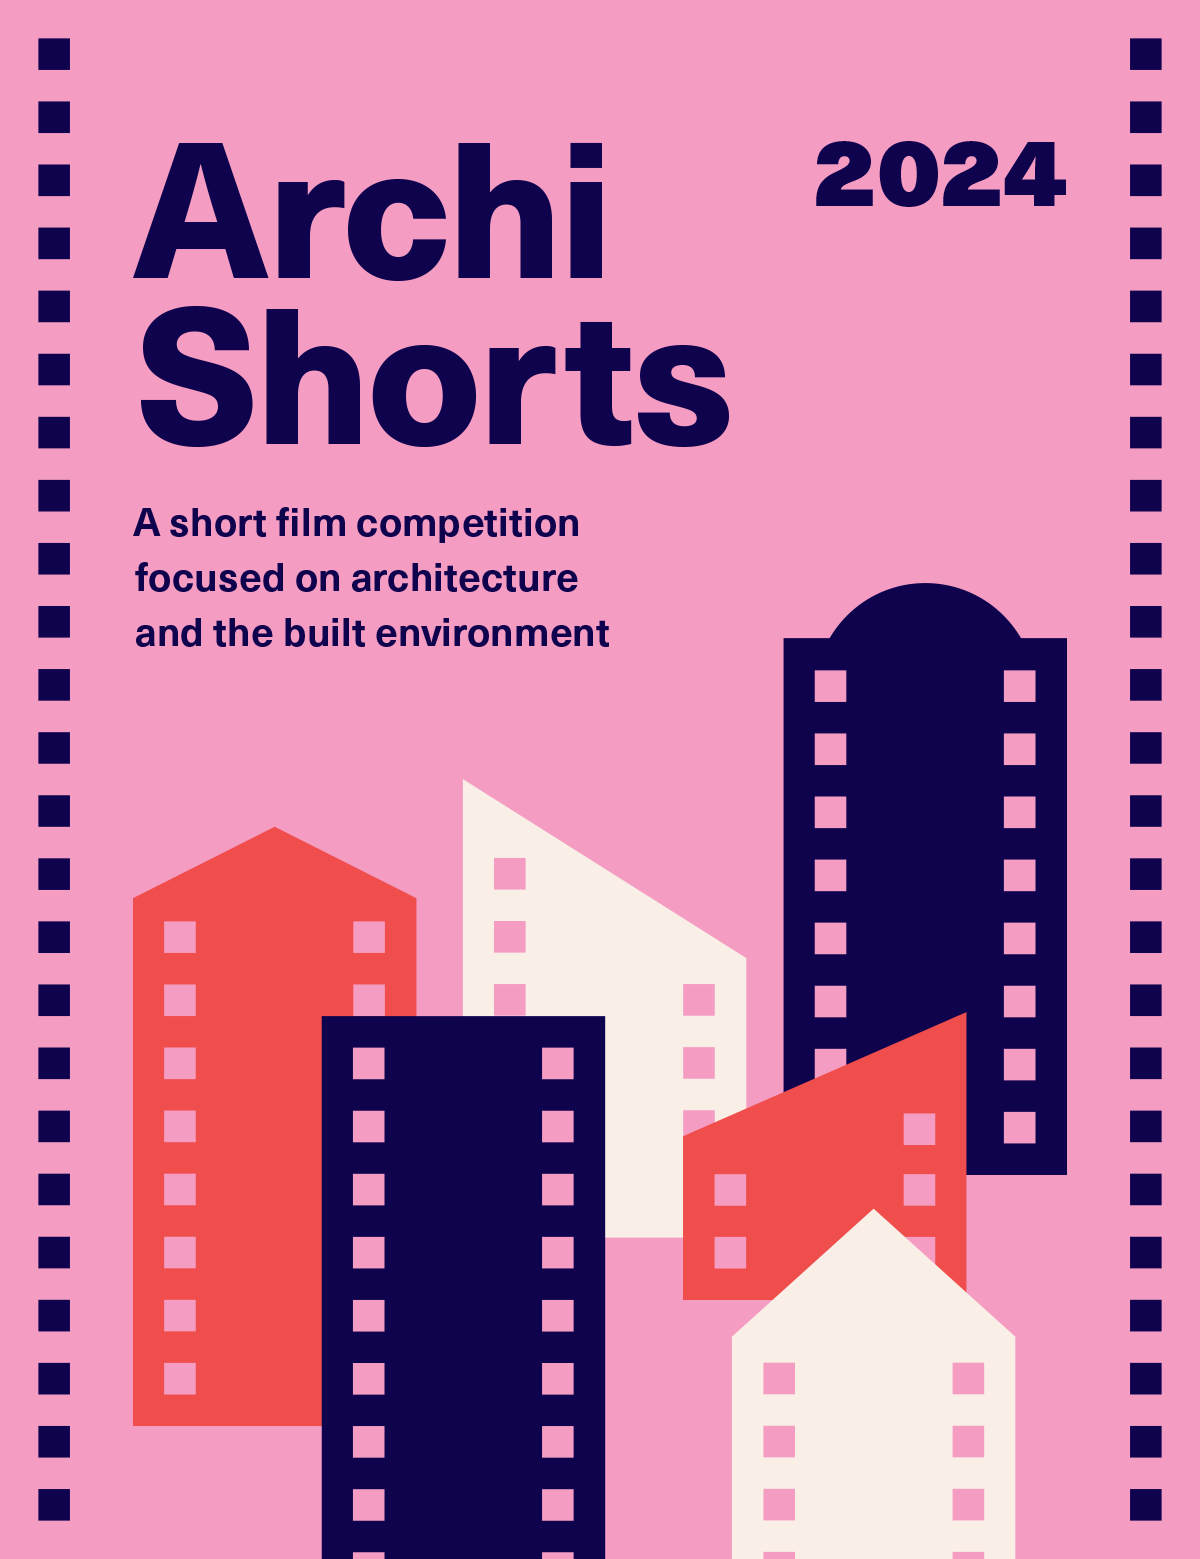 ArchiShorts 2024: A short film competition focused on architecture and the built environment. The poster includes colourful illustrations of film strips cut into the shapes of buildings, with the holes along the sides resembling windows.